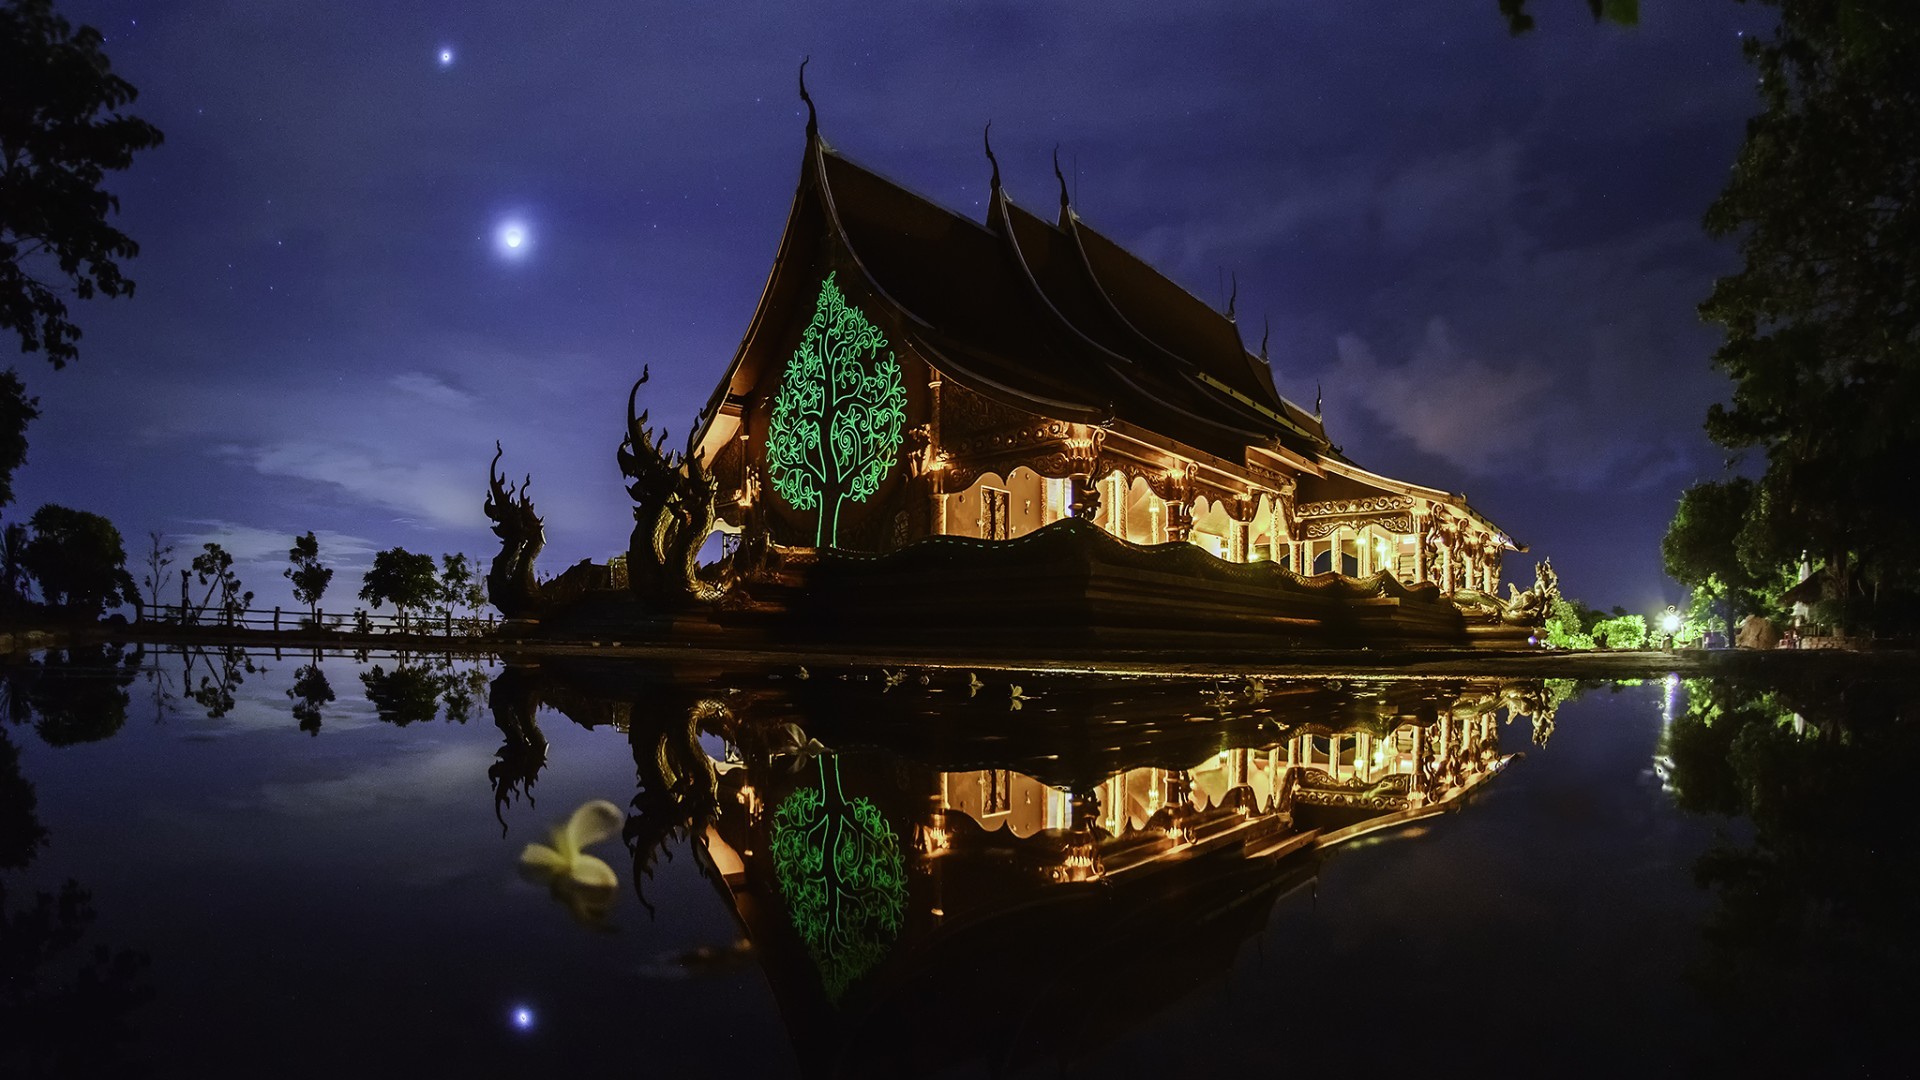 General 1920x1080 nature landscape architecture trees building water lake night Asian architecture reflection dragon lights clouds neon